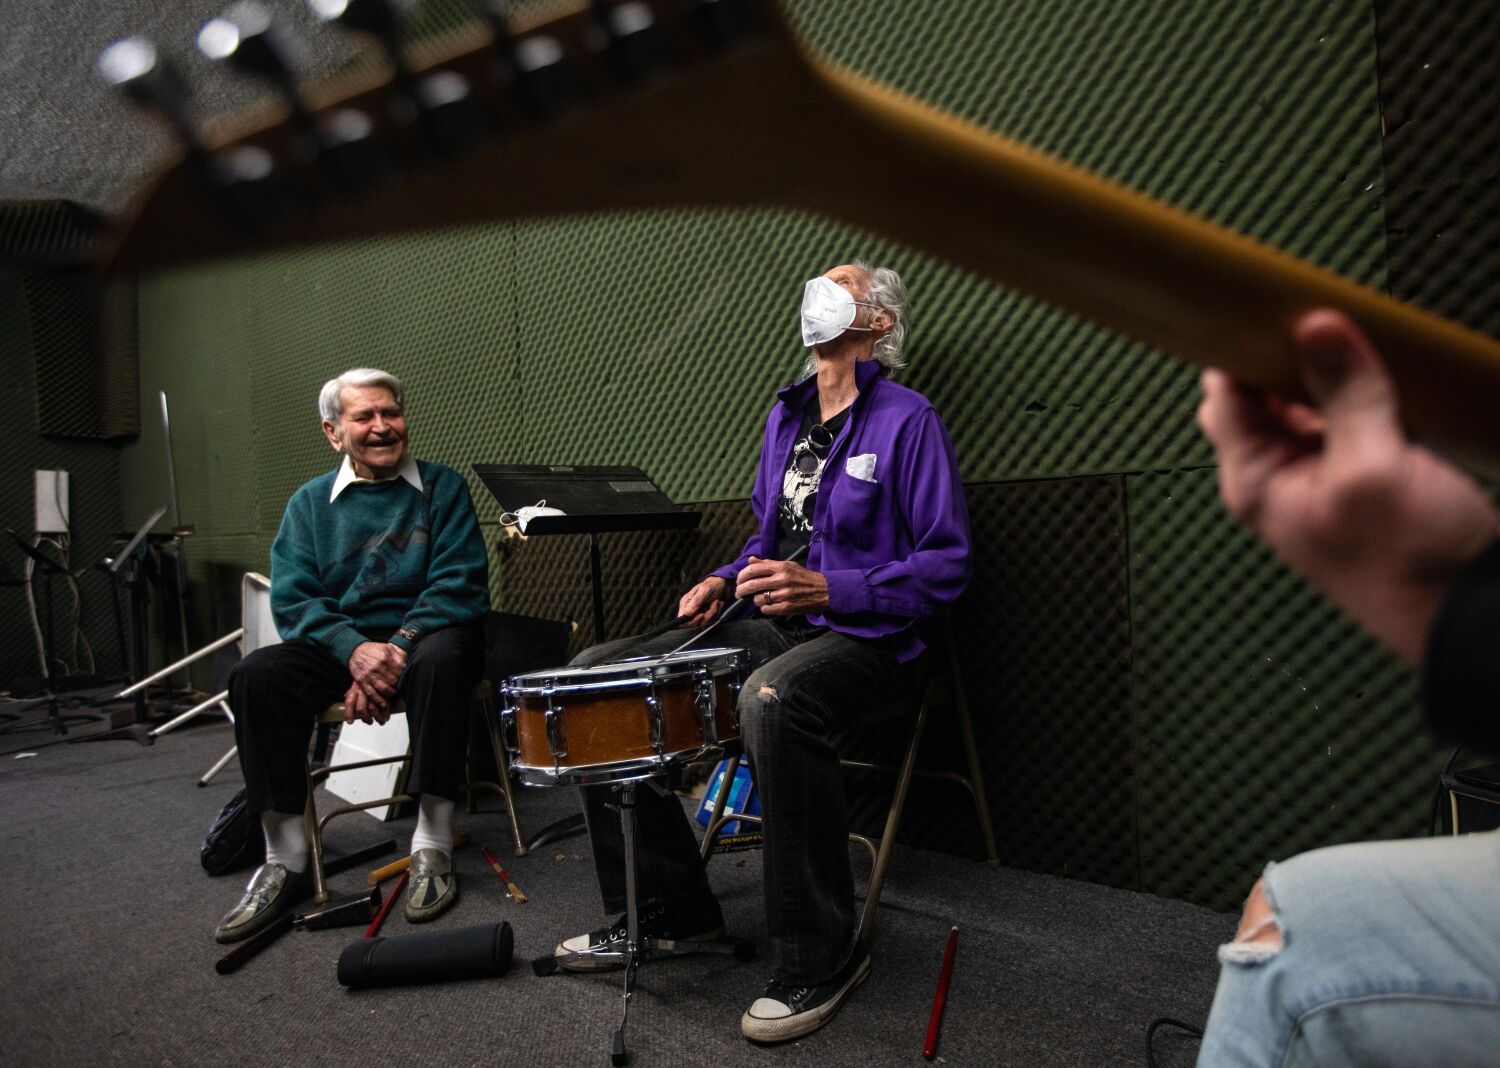 A 91-year-old drummer meets John Densmore of the Doors, and the music soars